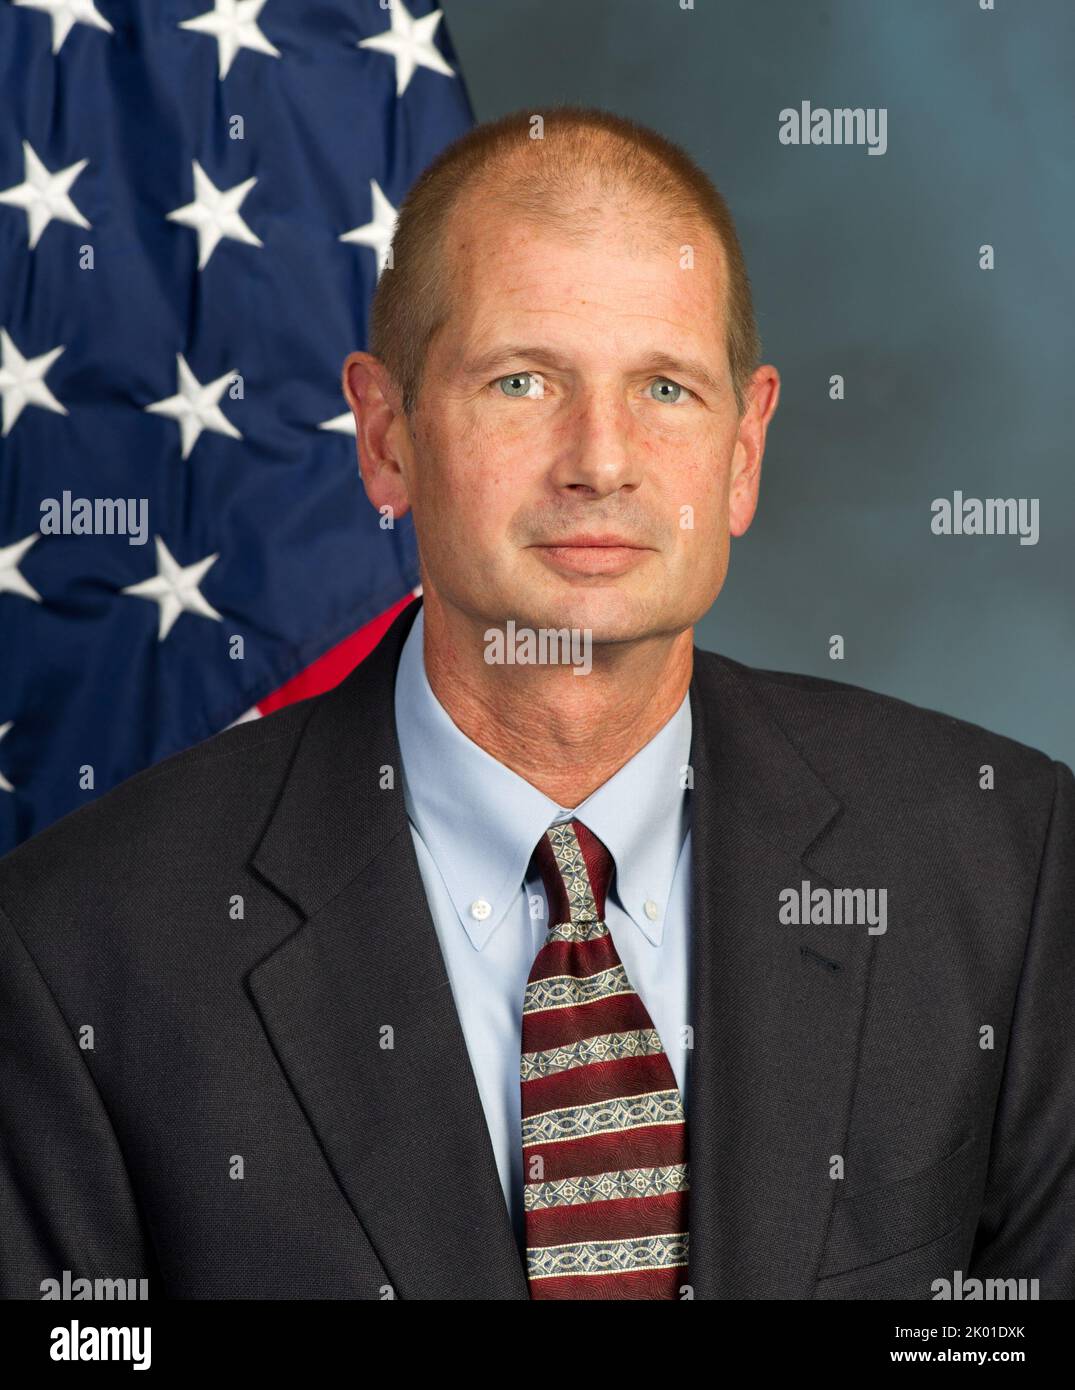 Official portrait of Charles Mace, Director, Space and Assets Management Division, Office of Facilities Management Services. Stock Photo